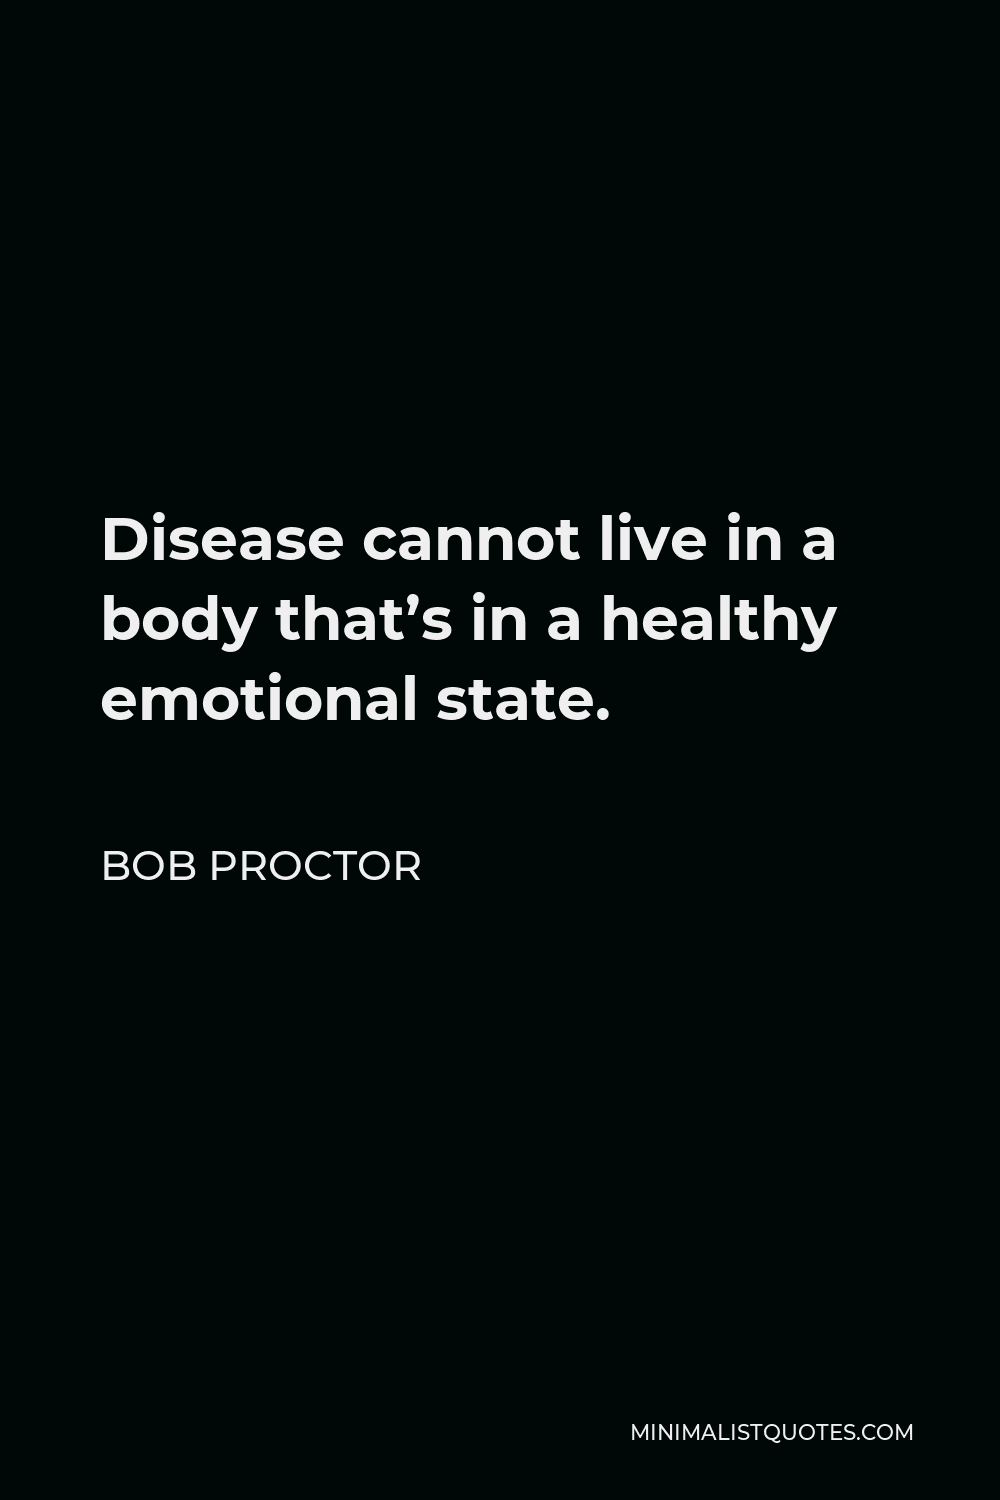 Bob Proctor Quote - Disease cannot live in a body that’s in a healthy emotional state.